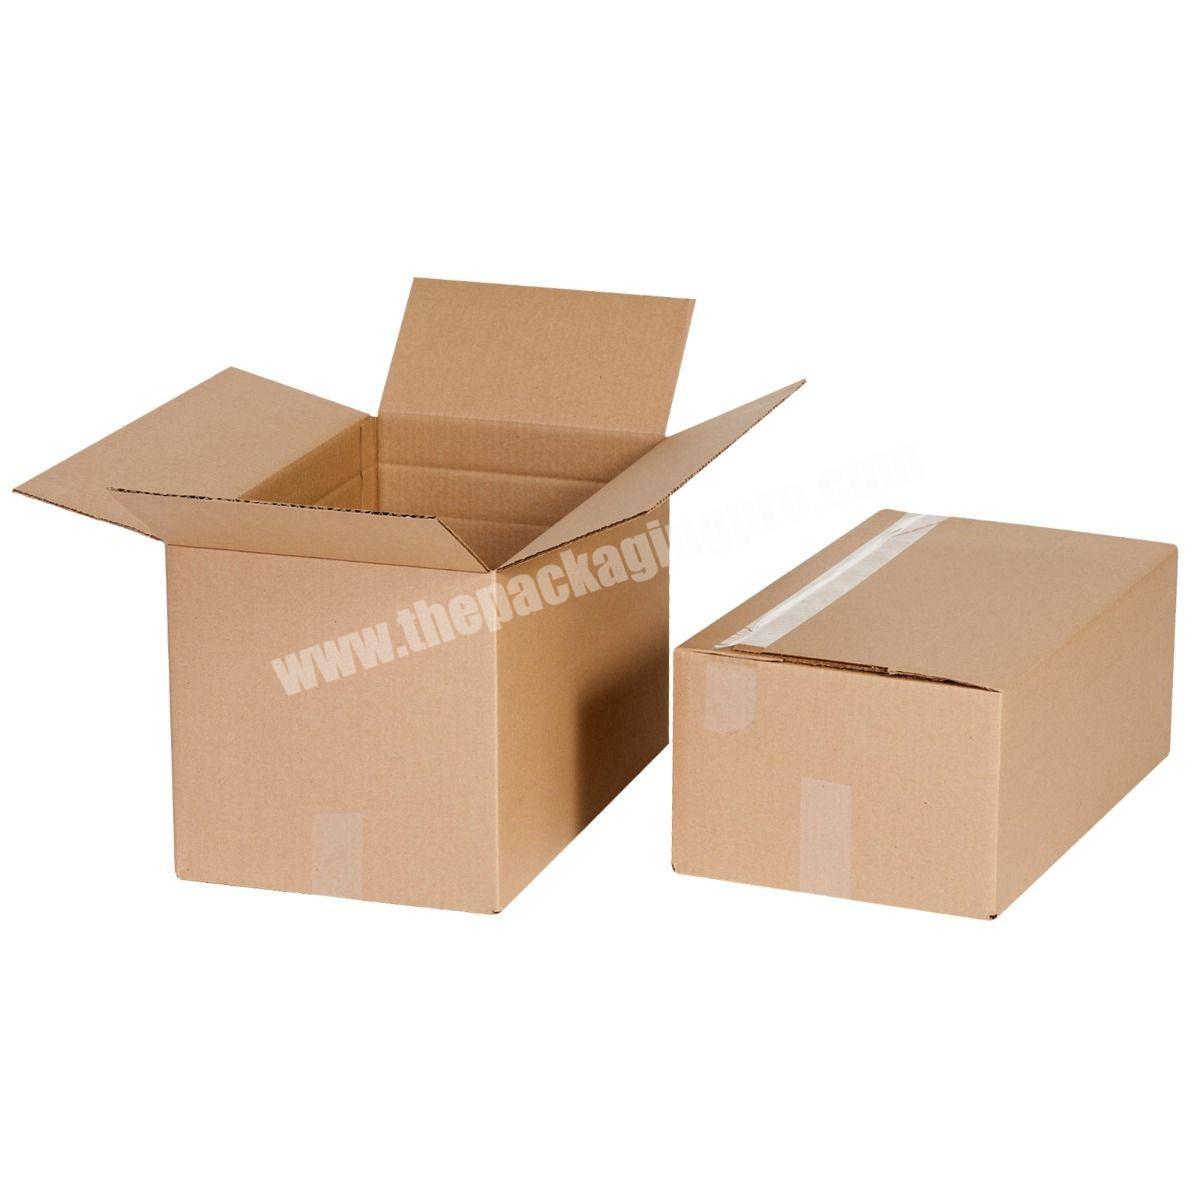 https://www.thepackagingpro.com/media/goods/images/what-are-mailer-boxes-book-boxes-in-stock-uline_OnZsNwb.jpg